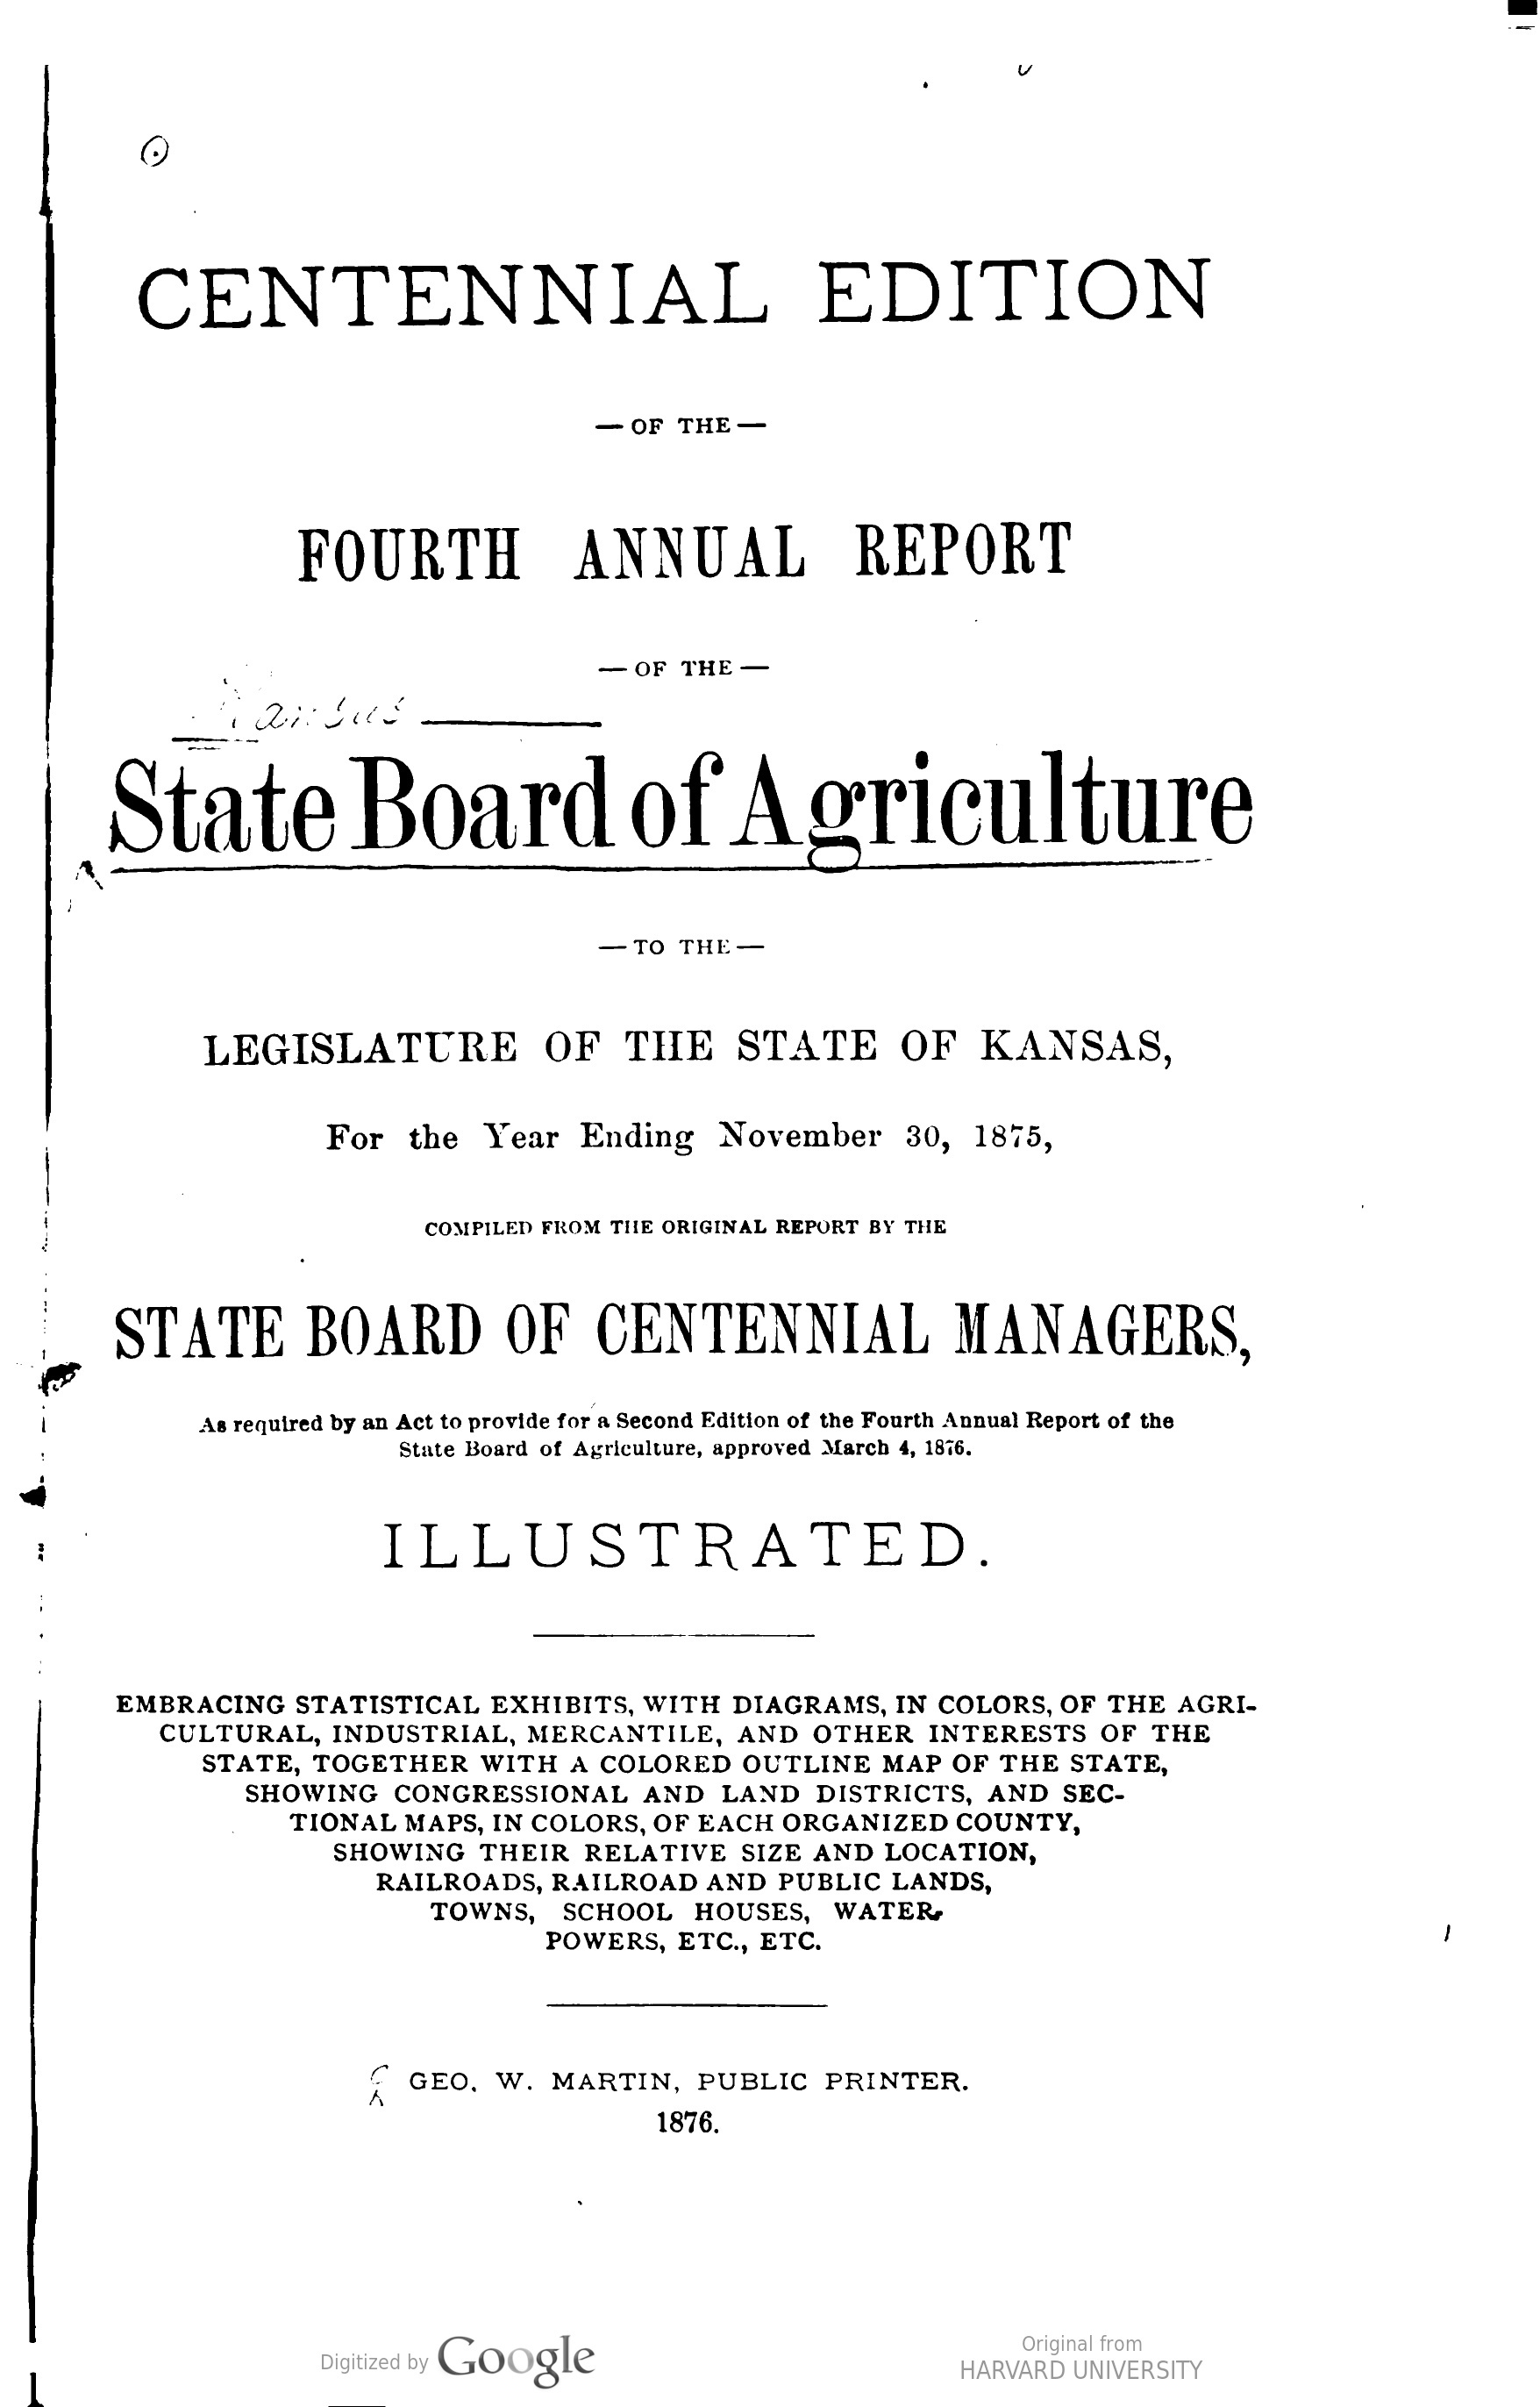 Title page from the Kansas State Board of Agriculture